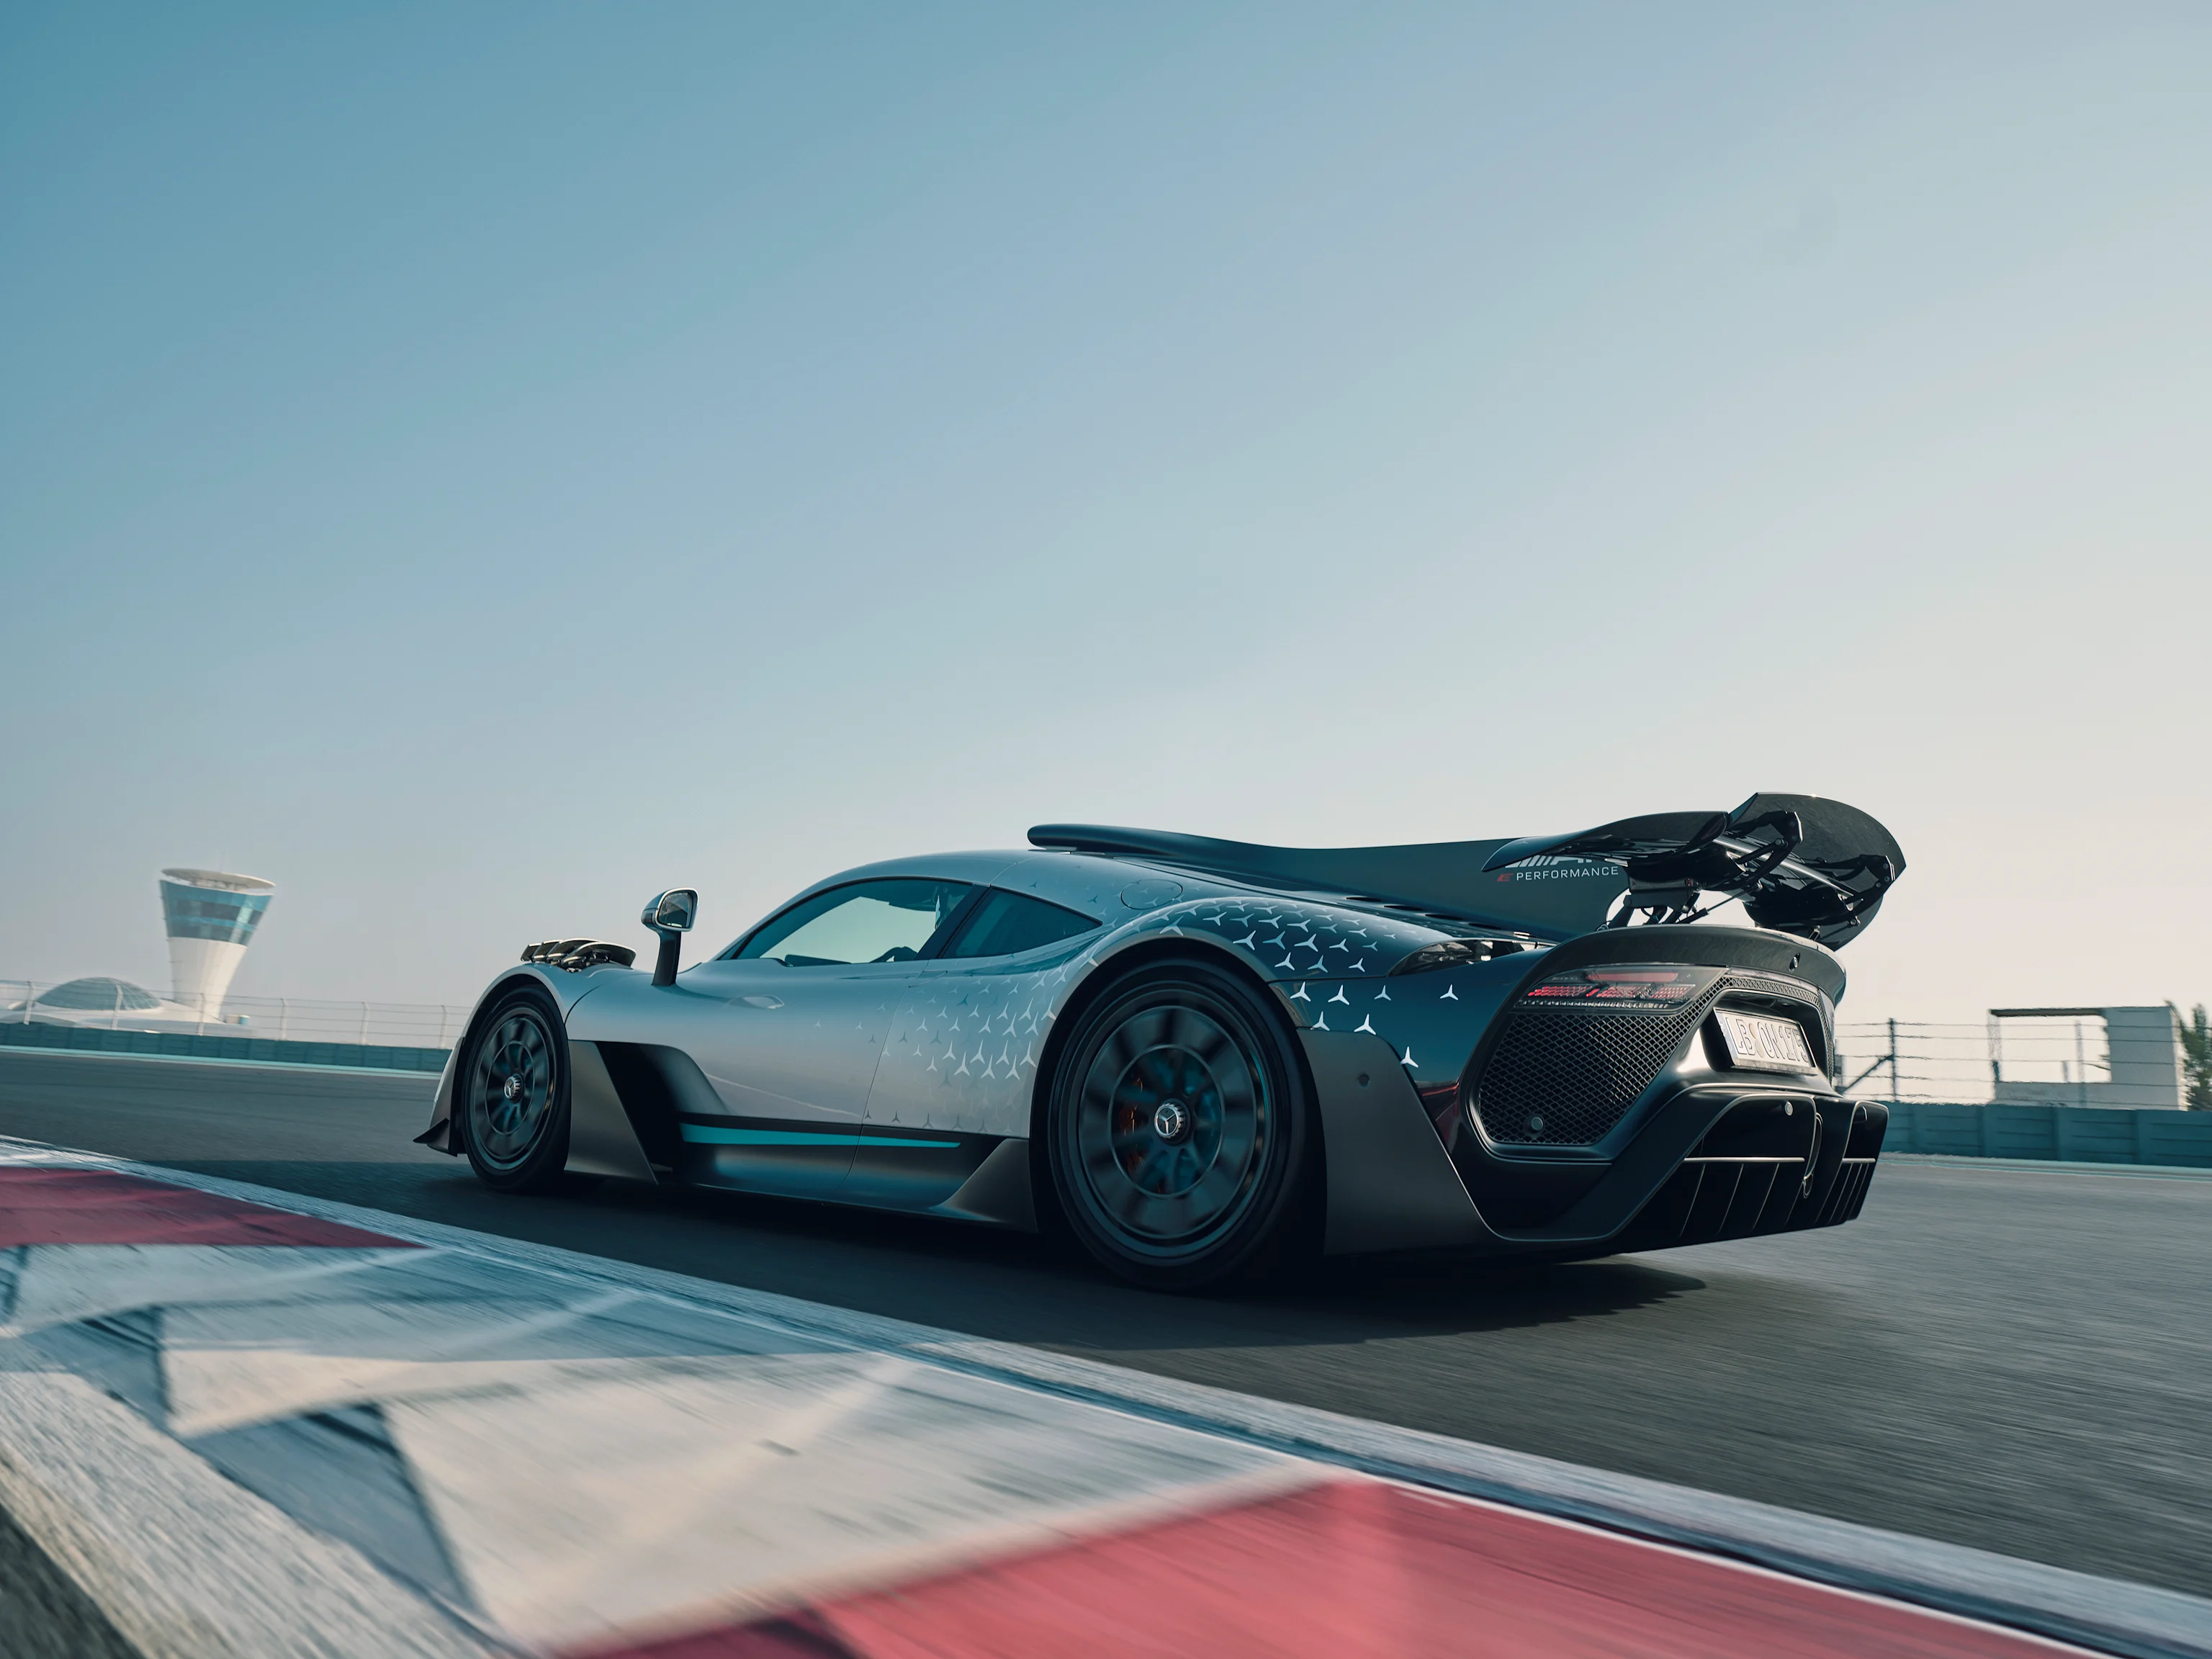 The $4.2 Million Mercedes-AMG One Has Eight Confirmed Australian Buyers